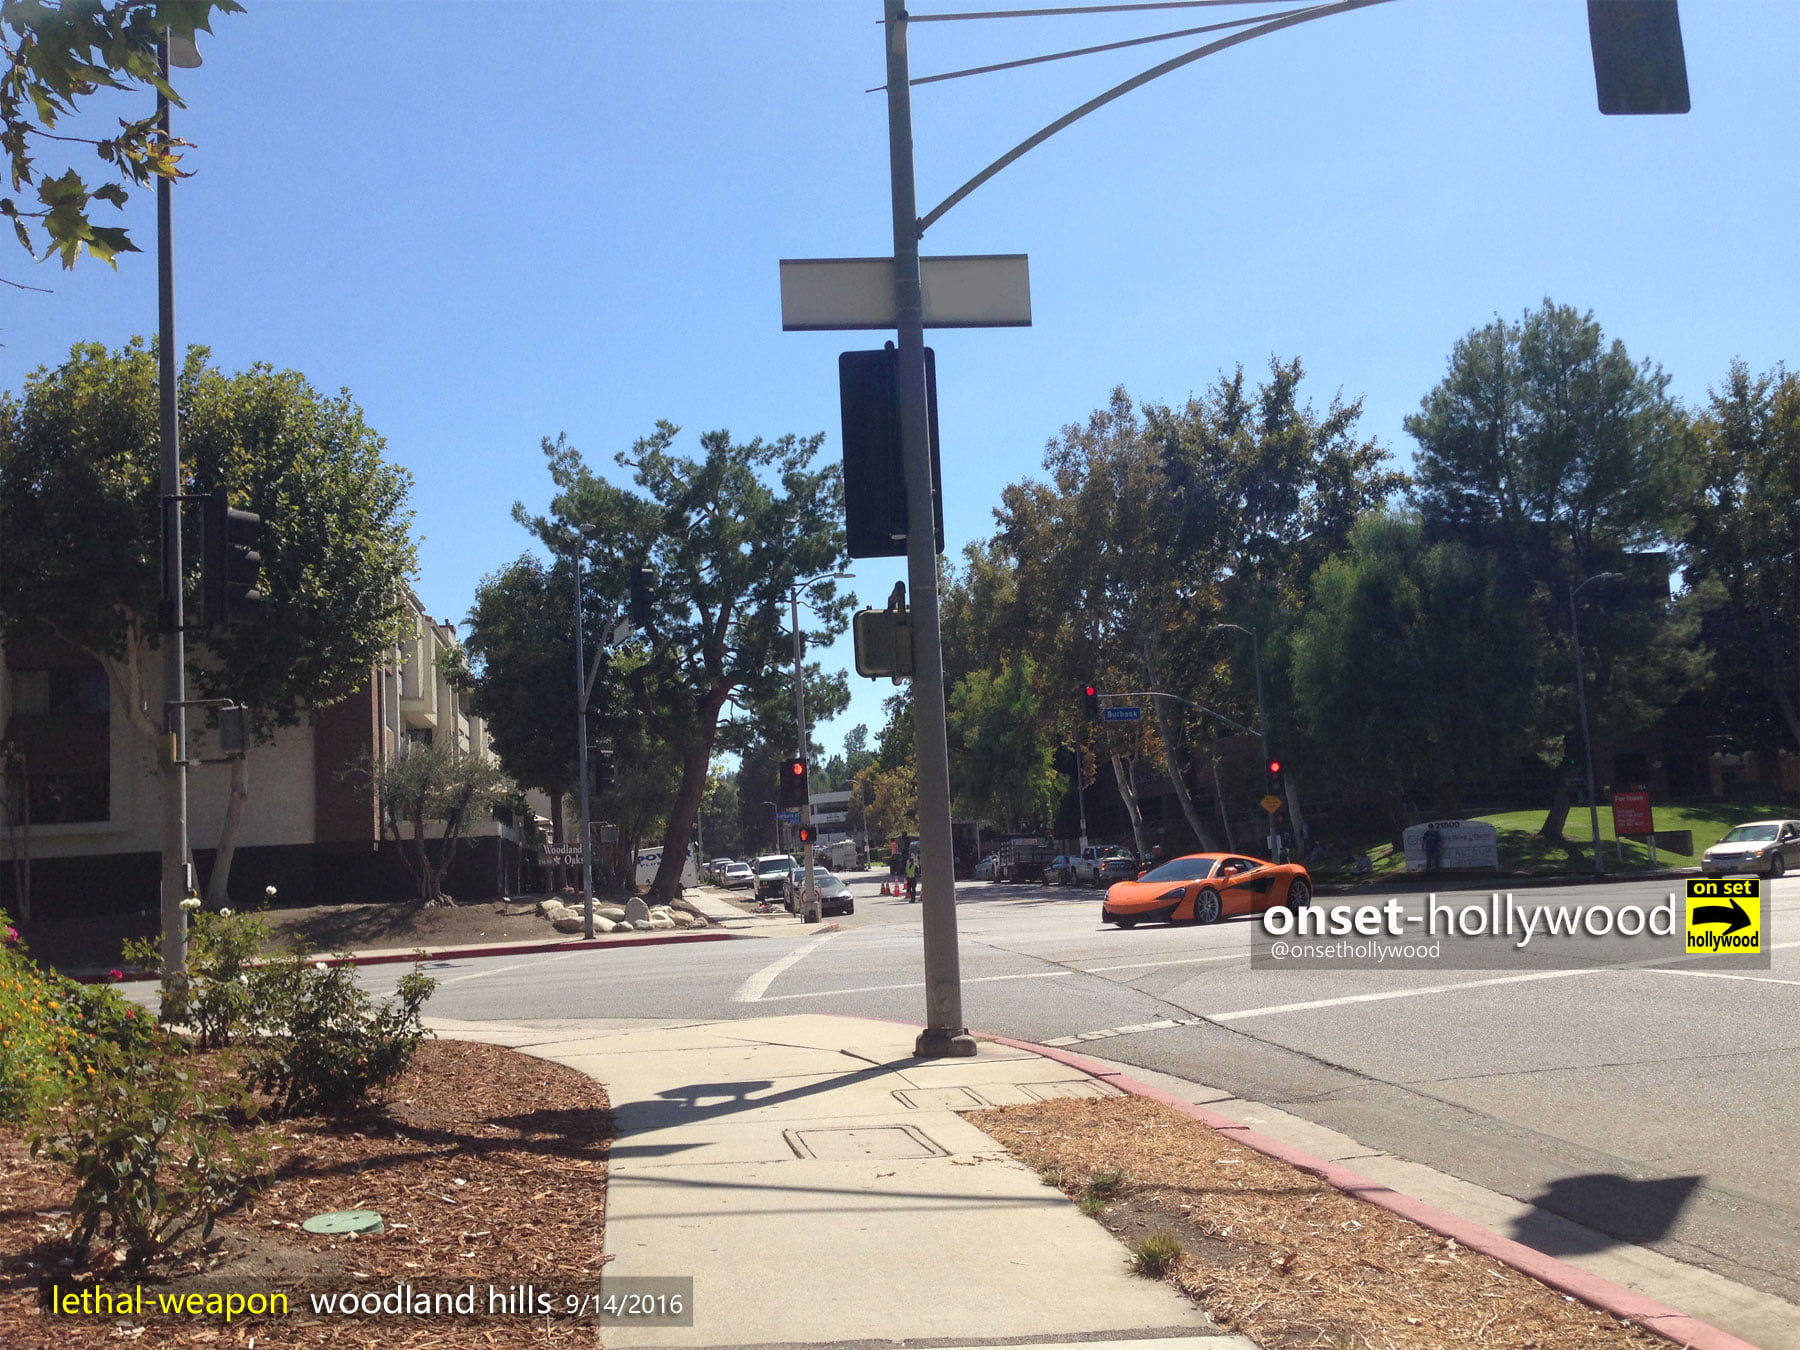 lethal-weapon-season-1-filming-locations-woodland-hills-pic2